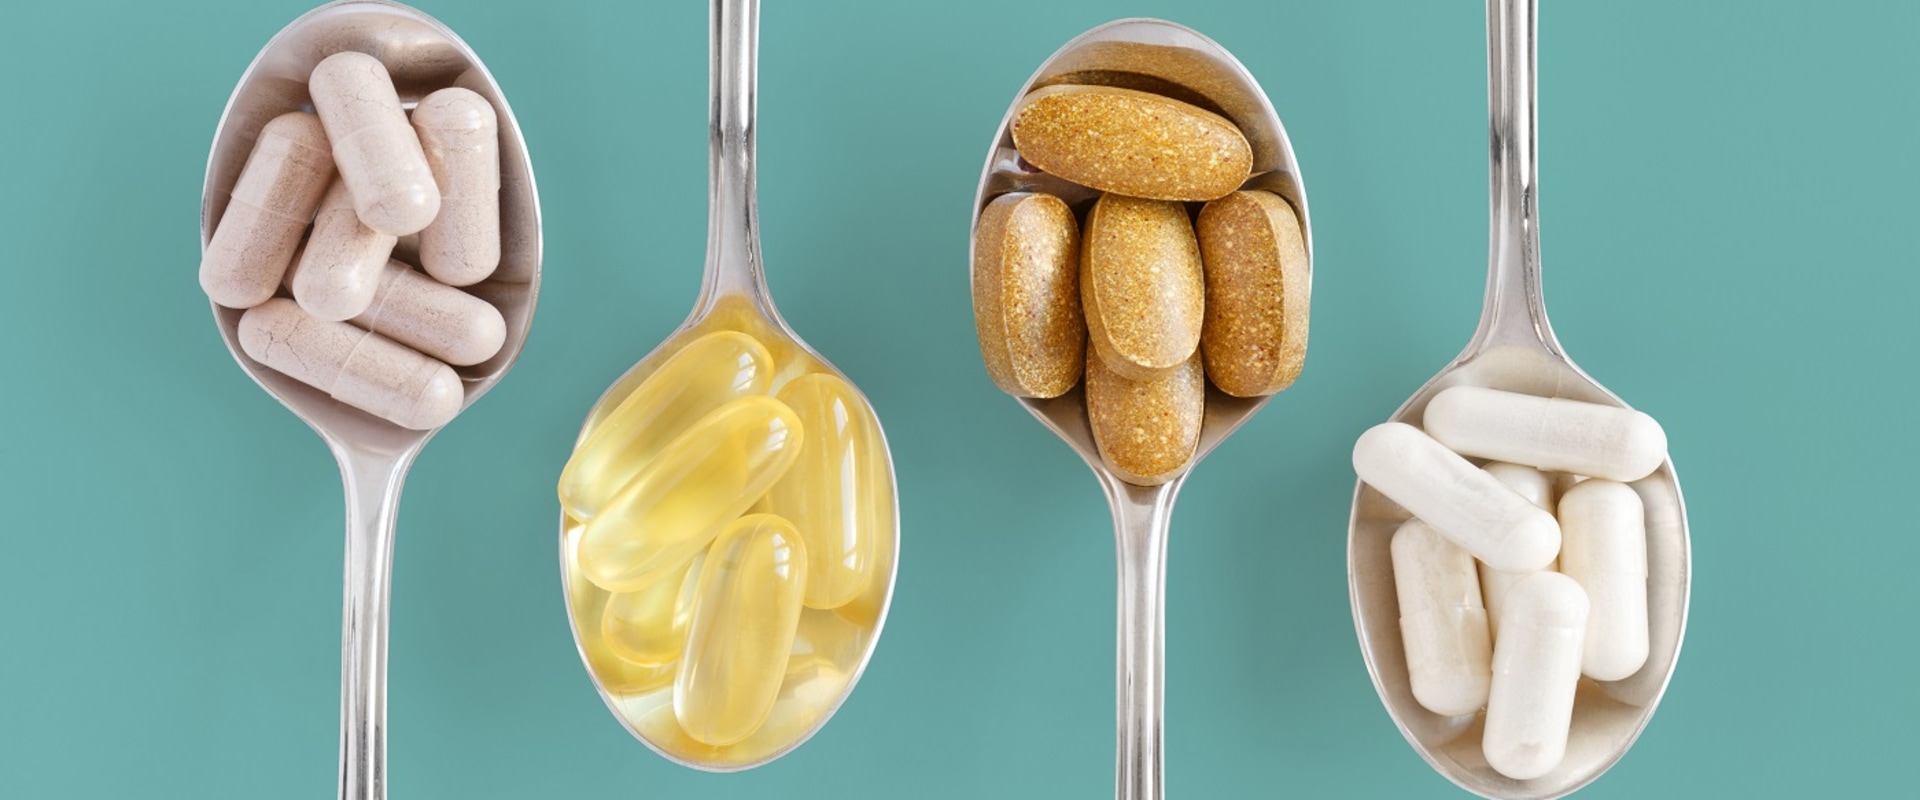 Can You Take a Multivitamin and a Dietary Supplement Together Safely?